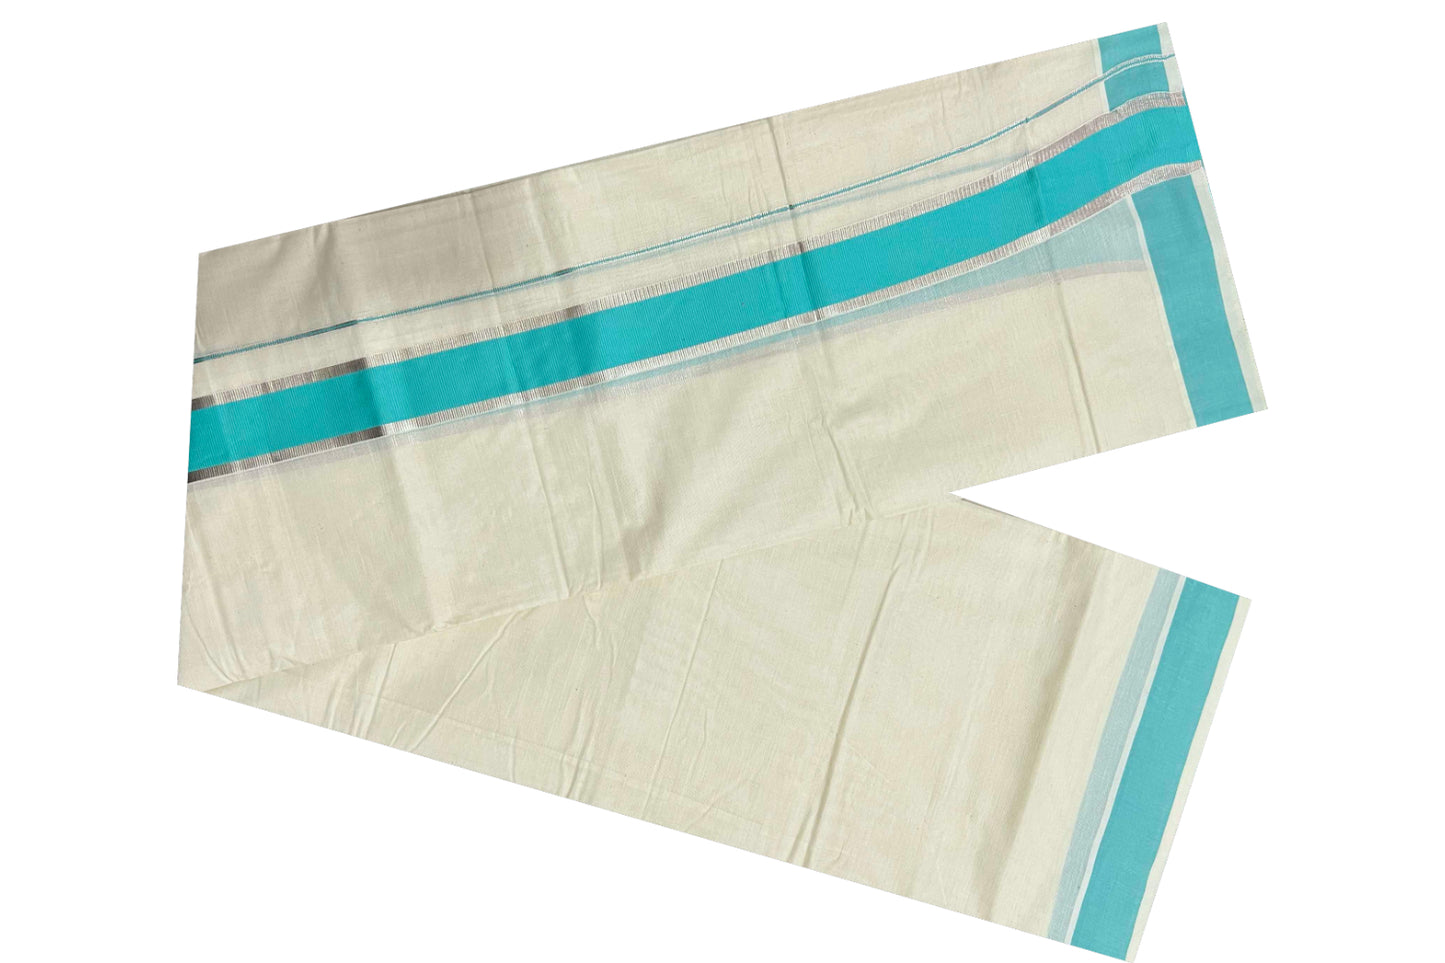 Off White Kerala Double Mundu with Silver Kasavu and Turquoise Border (South Indian Dhoti)